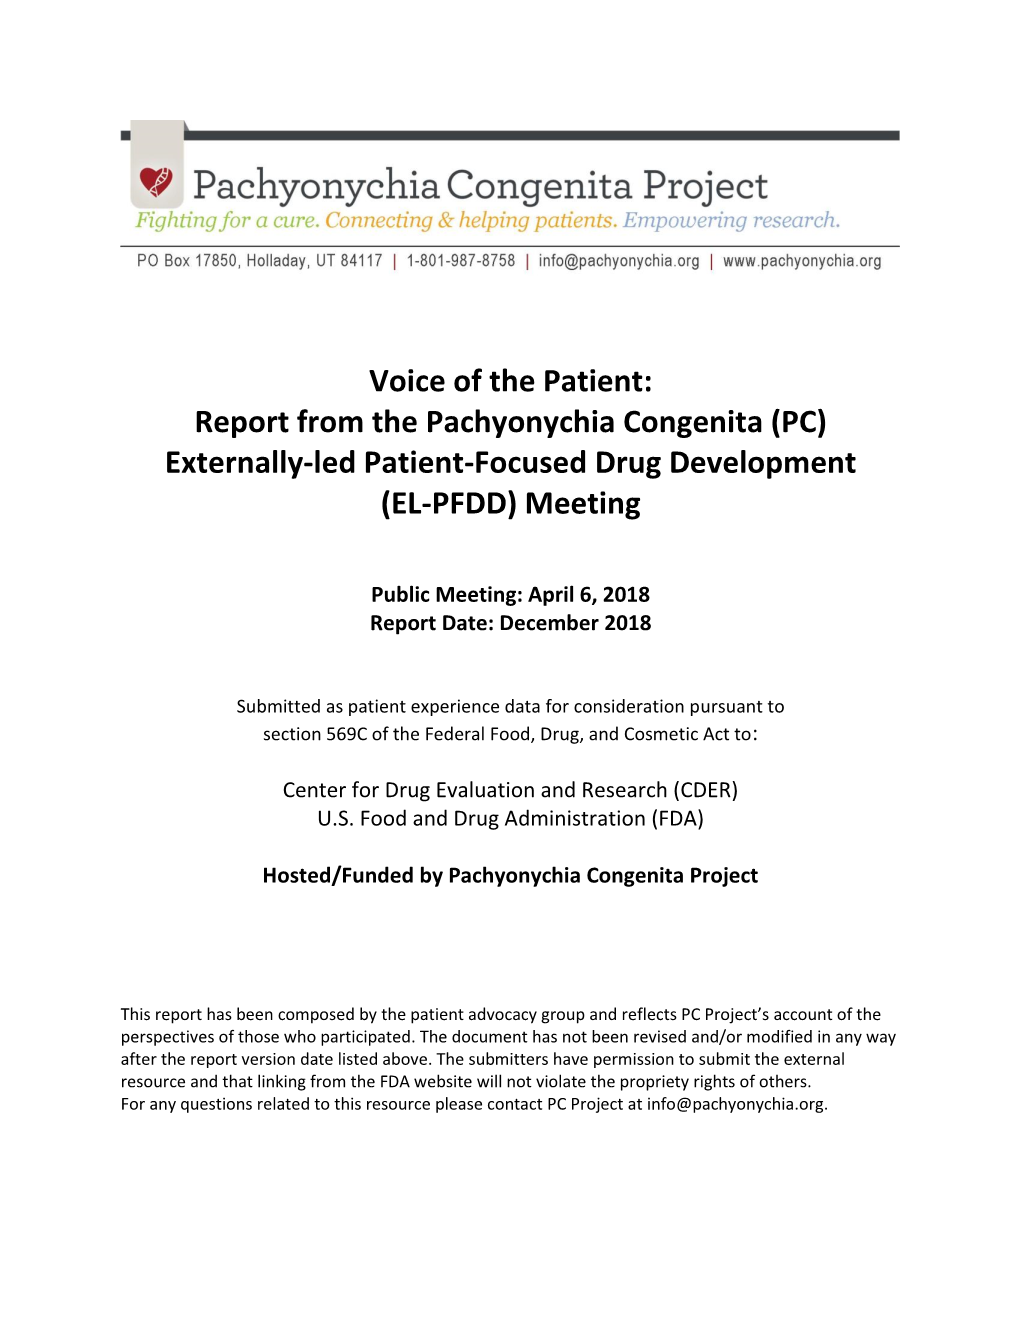 Voice of the Patient: Report from the Pachyonychia Congenita (PC) Externally-Led Patient-Focused Drug Development (EL-PFDD) Meeting